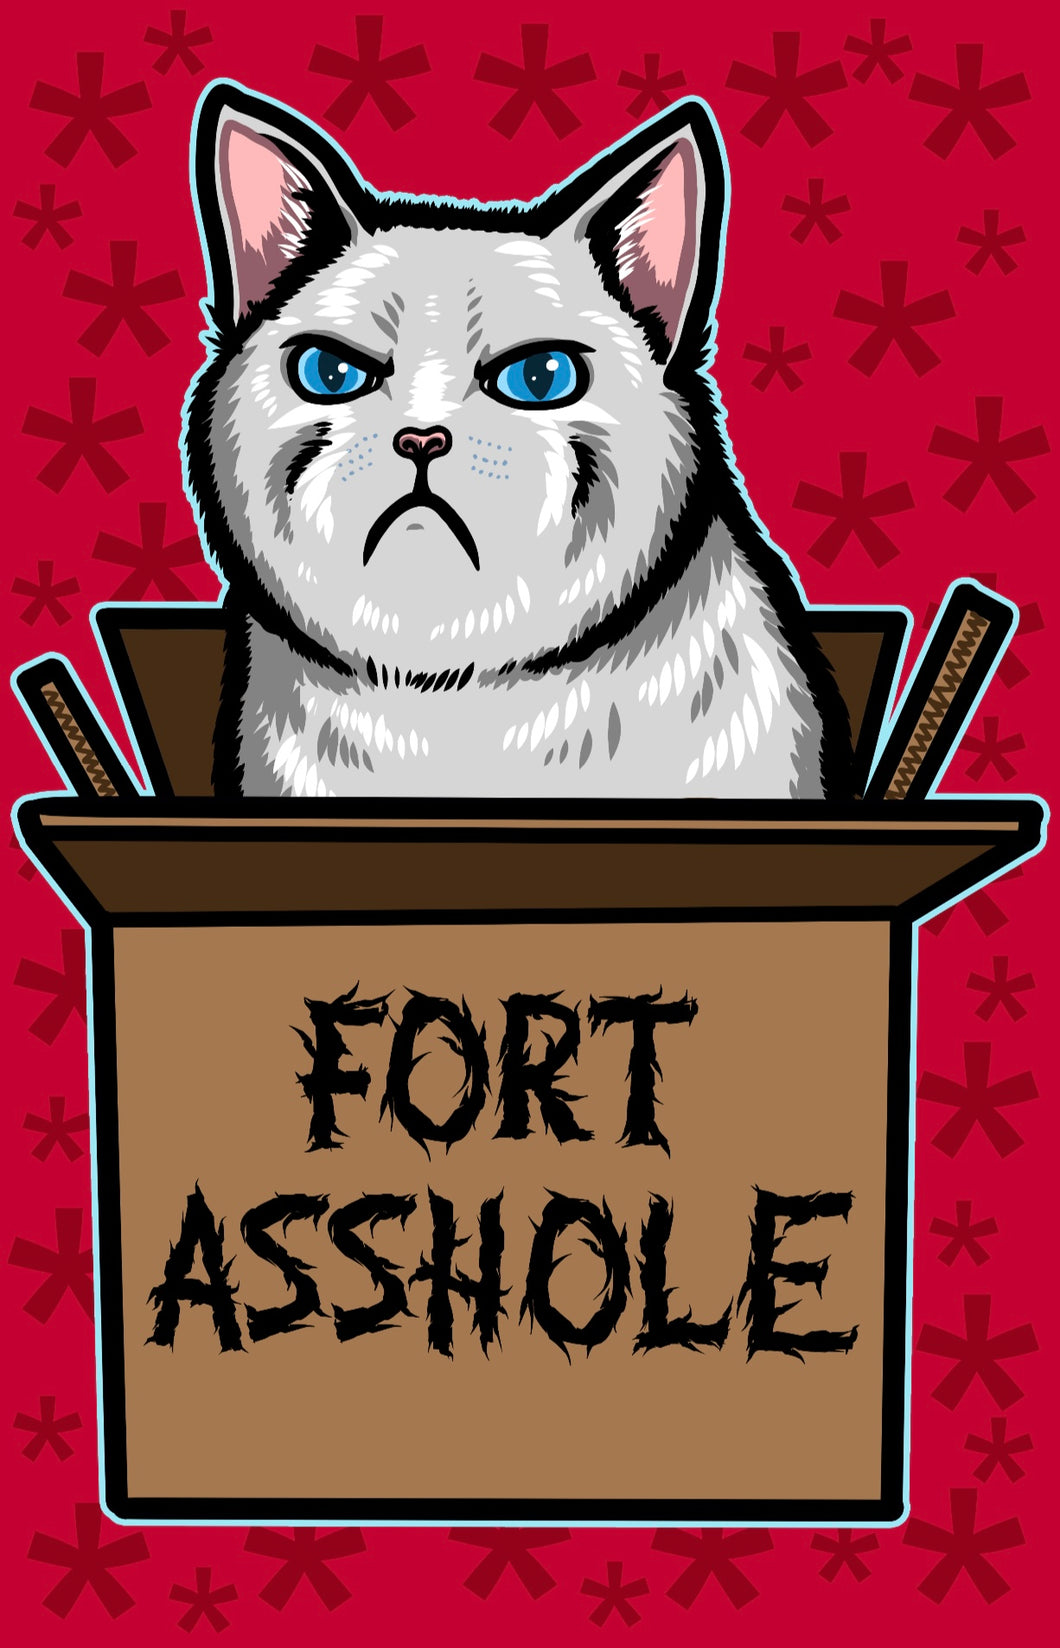 Fort A Hole! Angry White Kitty Cat  - Art Print Poster